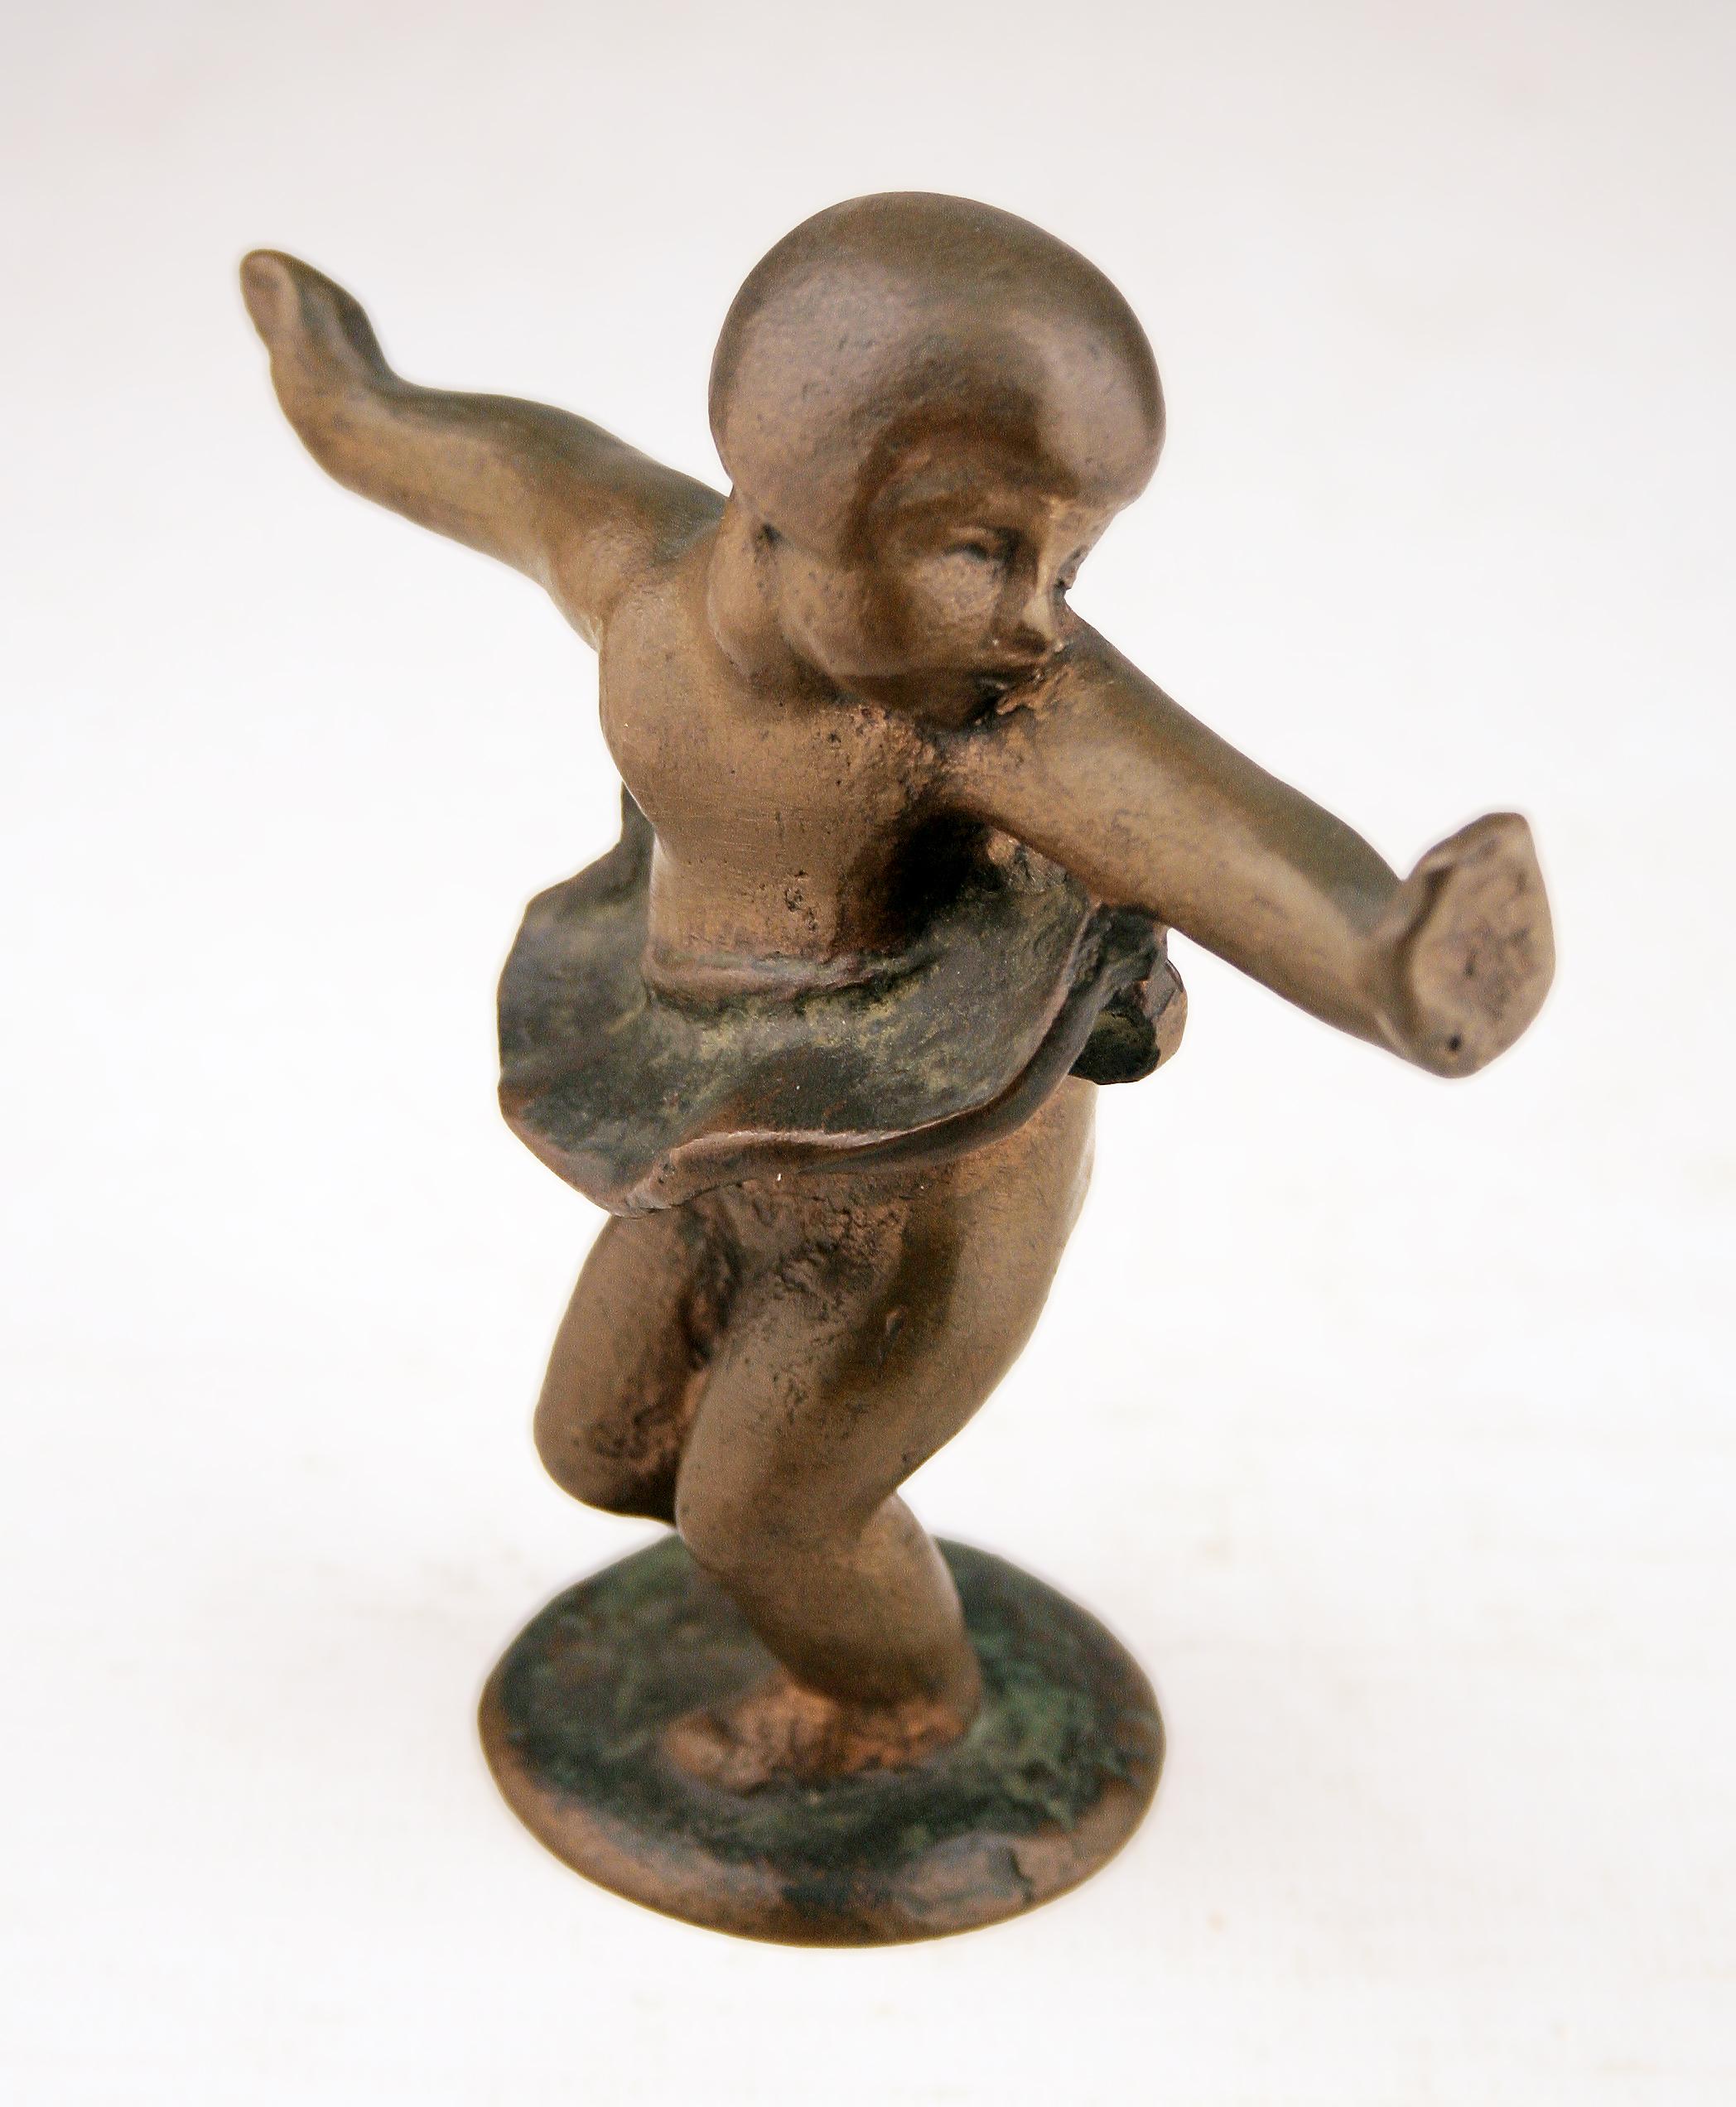 Early 20th century Art Déco small bronze sculpture of girl with skirt dancing

By: unknown
Material: bronze, copper, metal
Technique: patinated, cast, molded, metalwork
Dimensions: 2 in x 5 in x 4 in
Date: early 20th century
Style: Art Déco
Place of